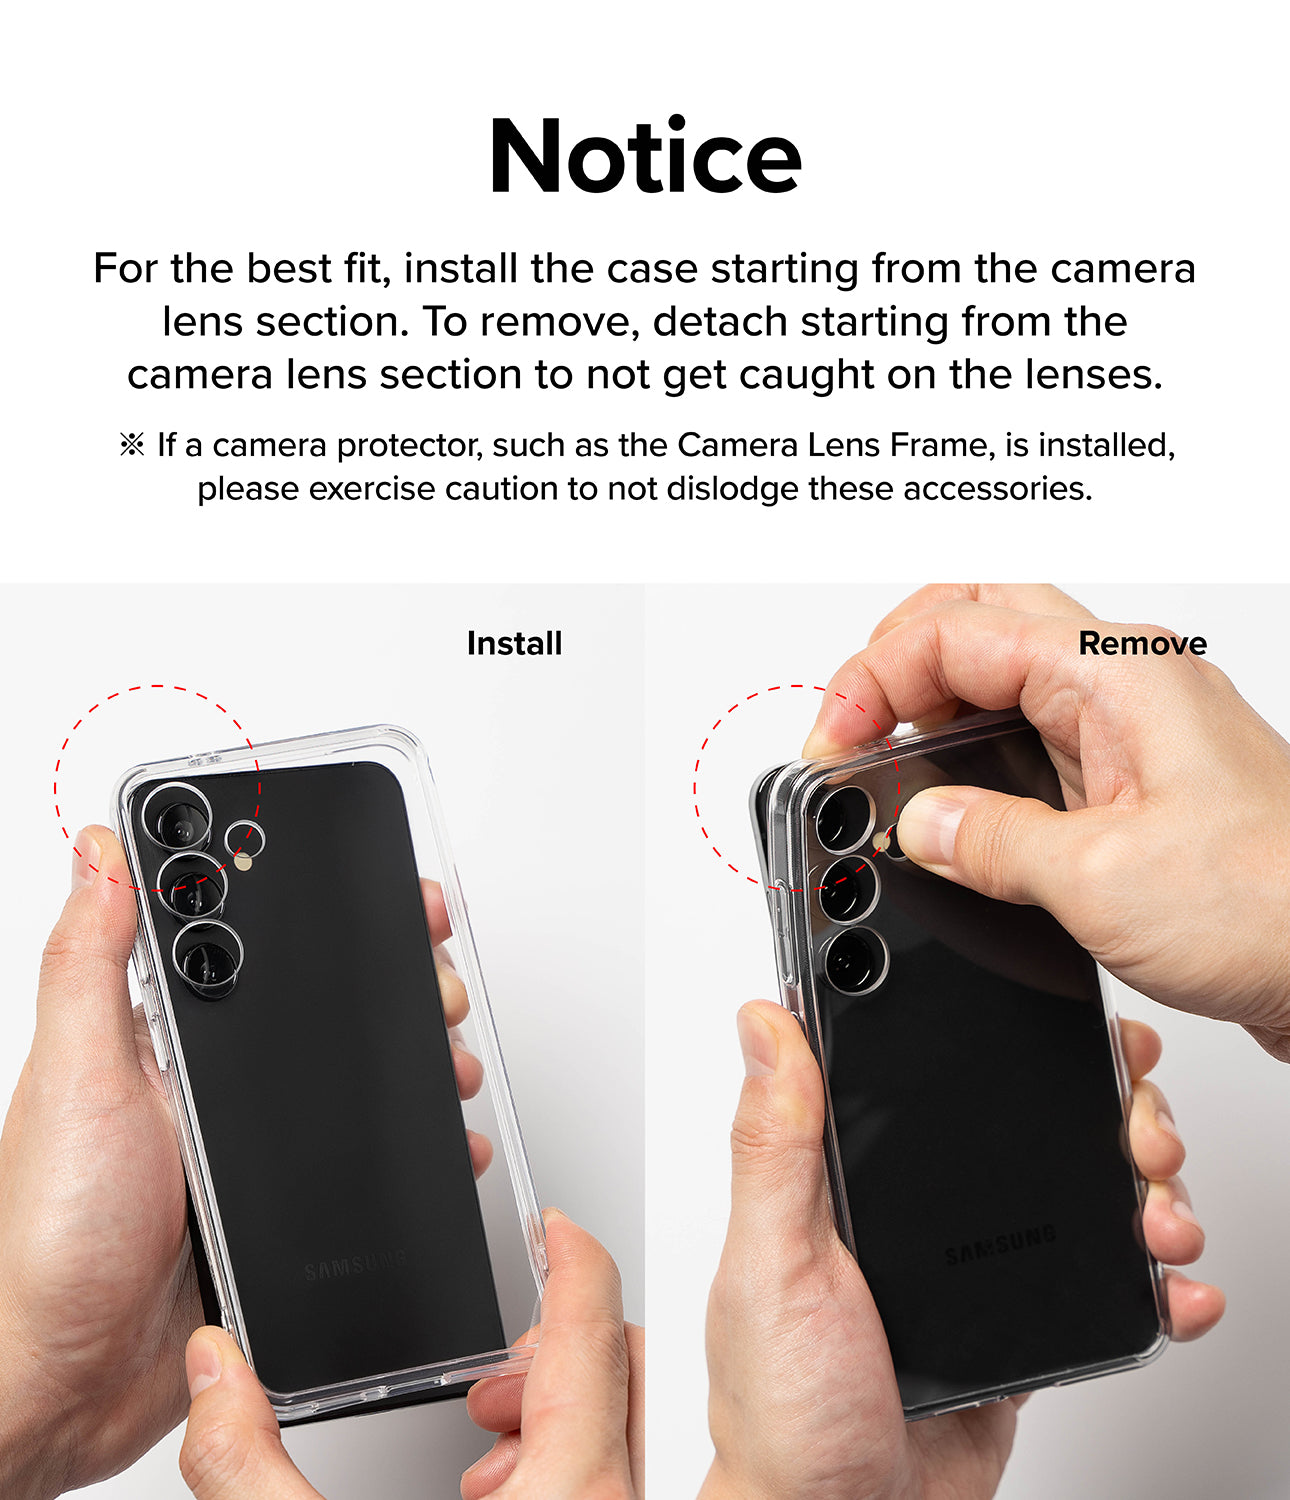 Galaxy S24 Case | Fusion-X - Notice. For the best fit, install the case starting from the camera lens section. To remove, detach starting from the camera lens section to not get caught on the lenses.